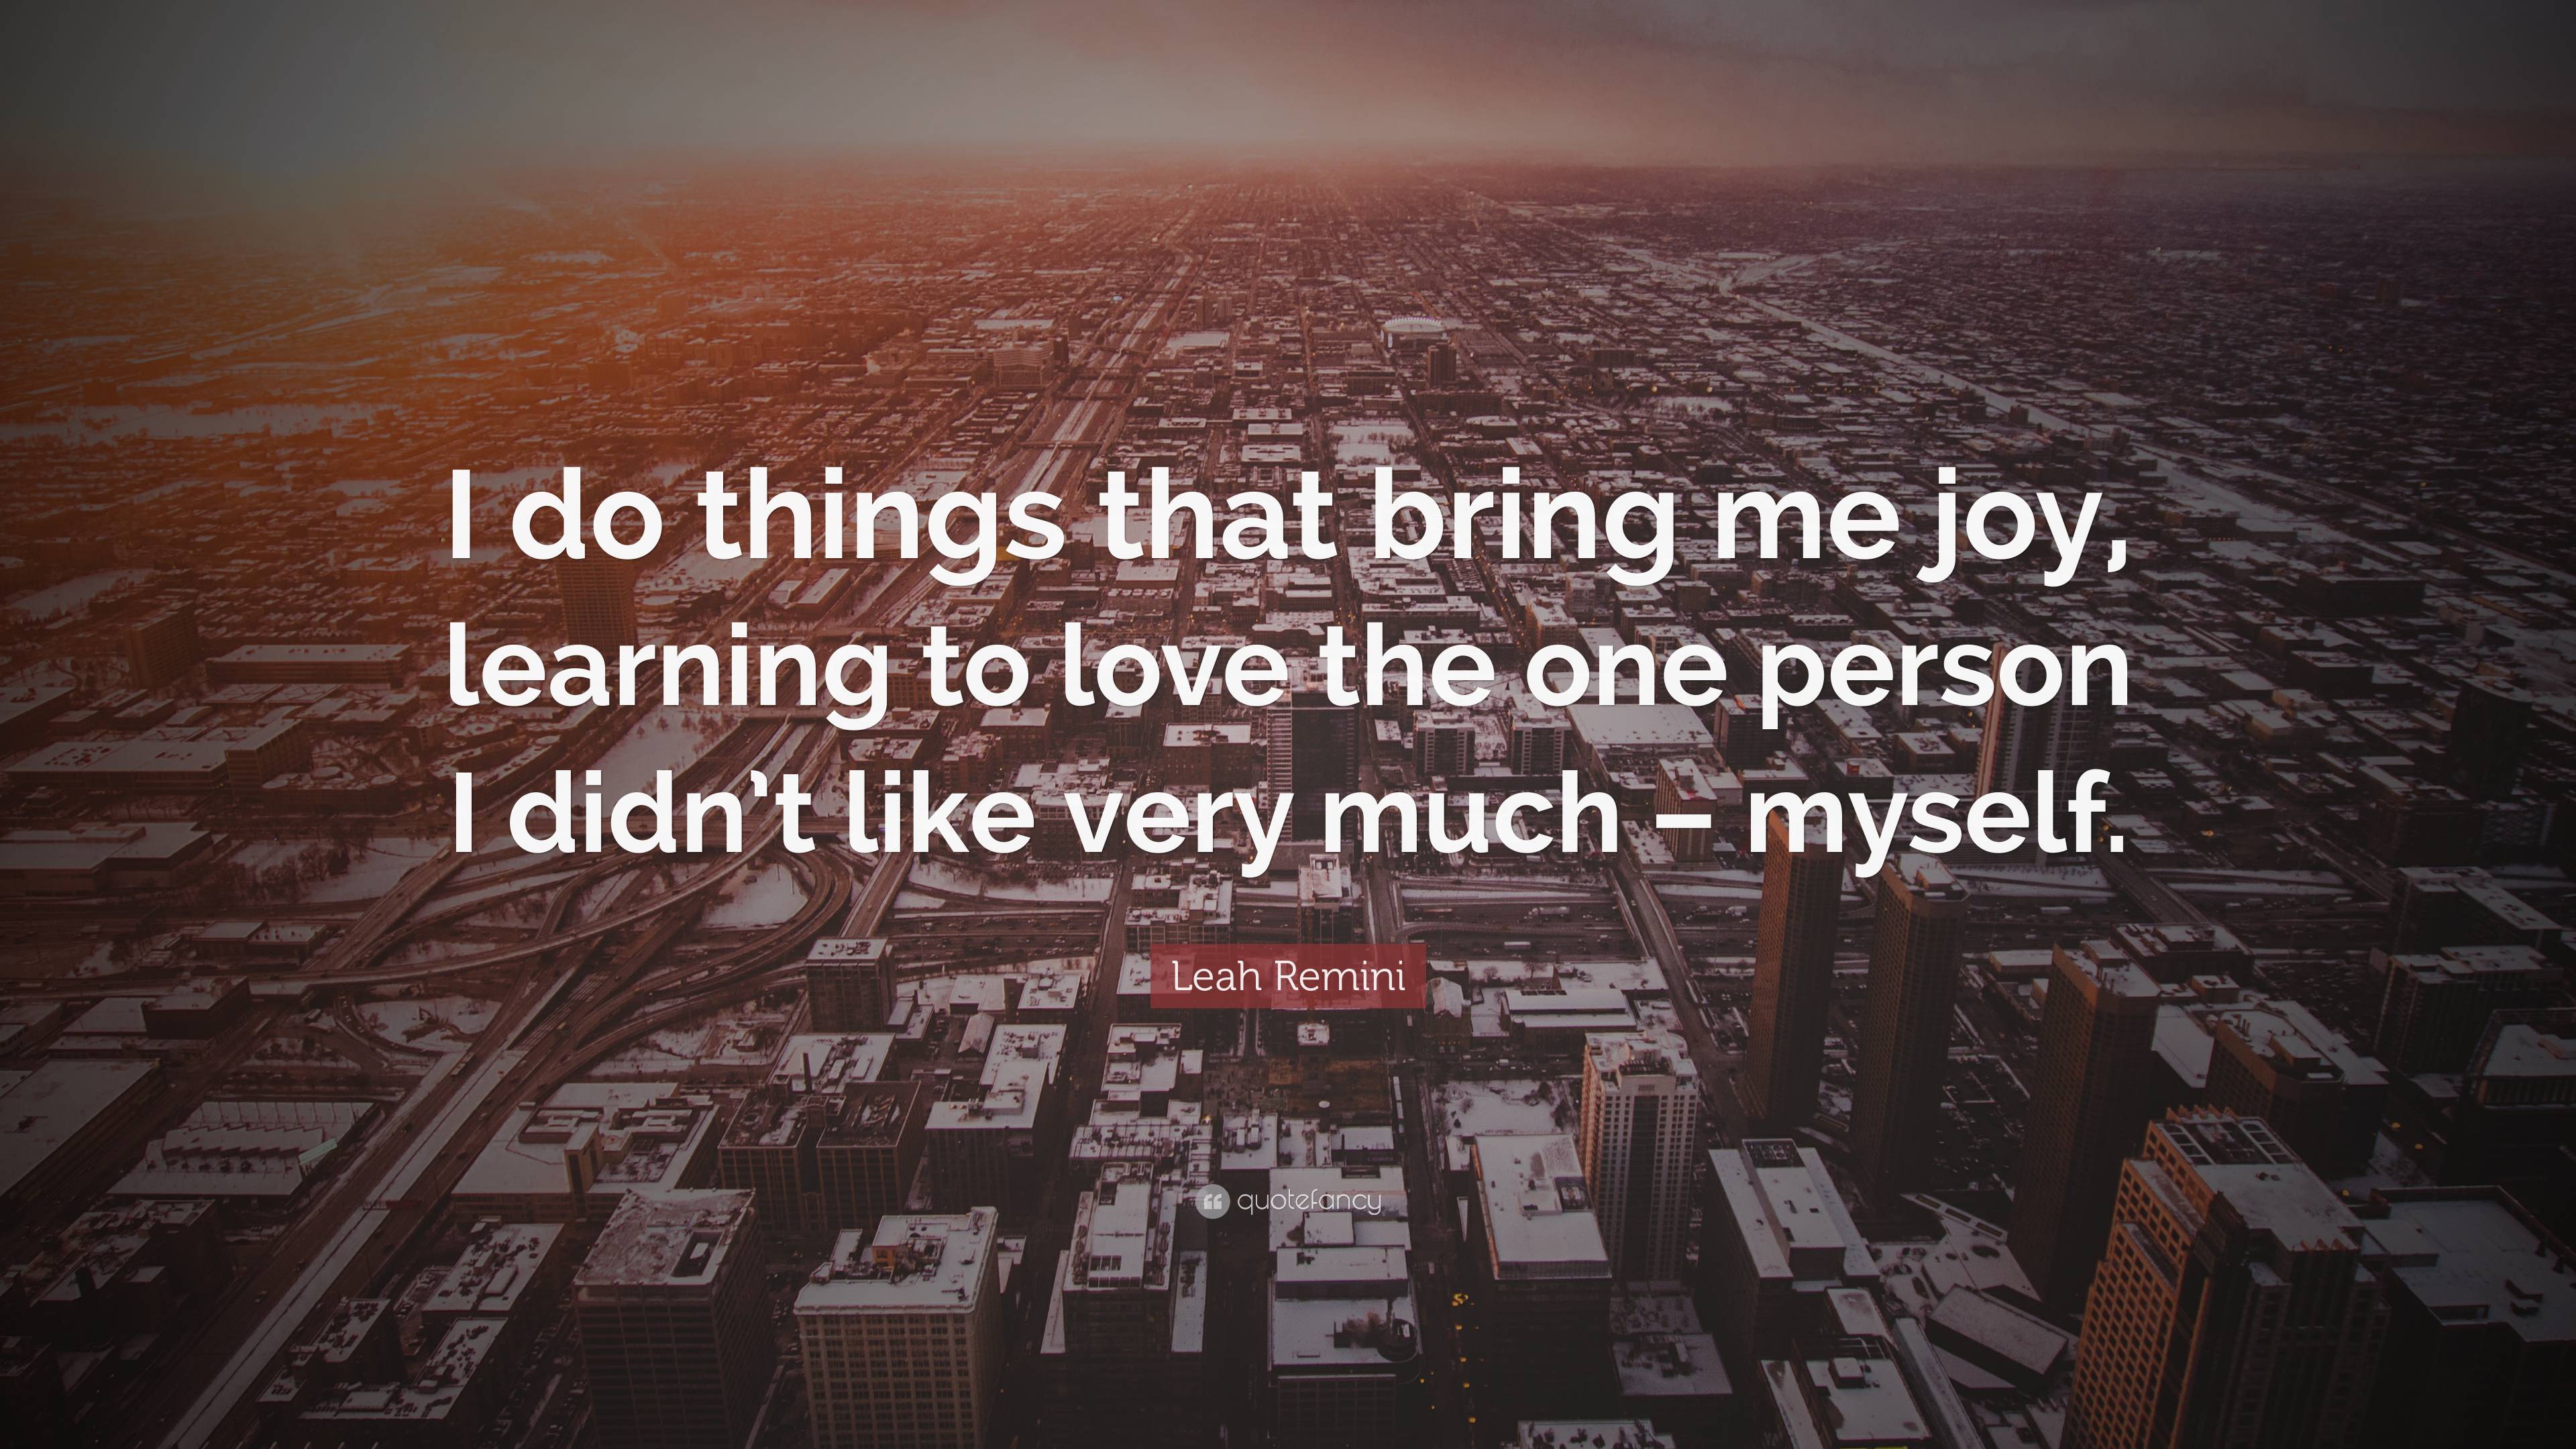 Leah Remini Quote: “I do things that bring me joy, learning to love the ...